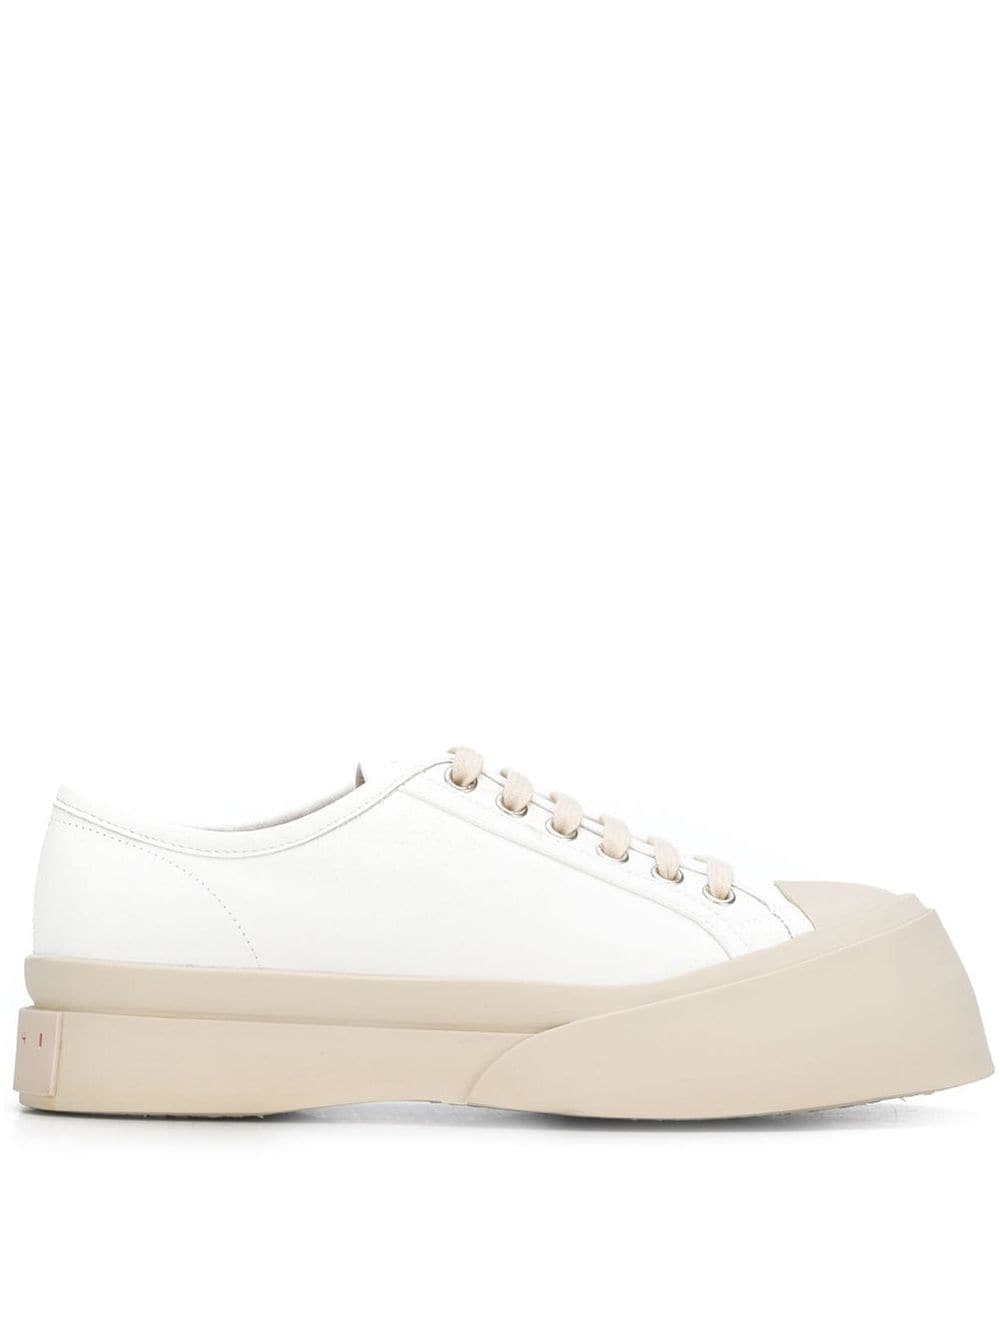 MARNI Women Laced Up Pablo Smooth Calf Leather Sneaker - 1